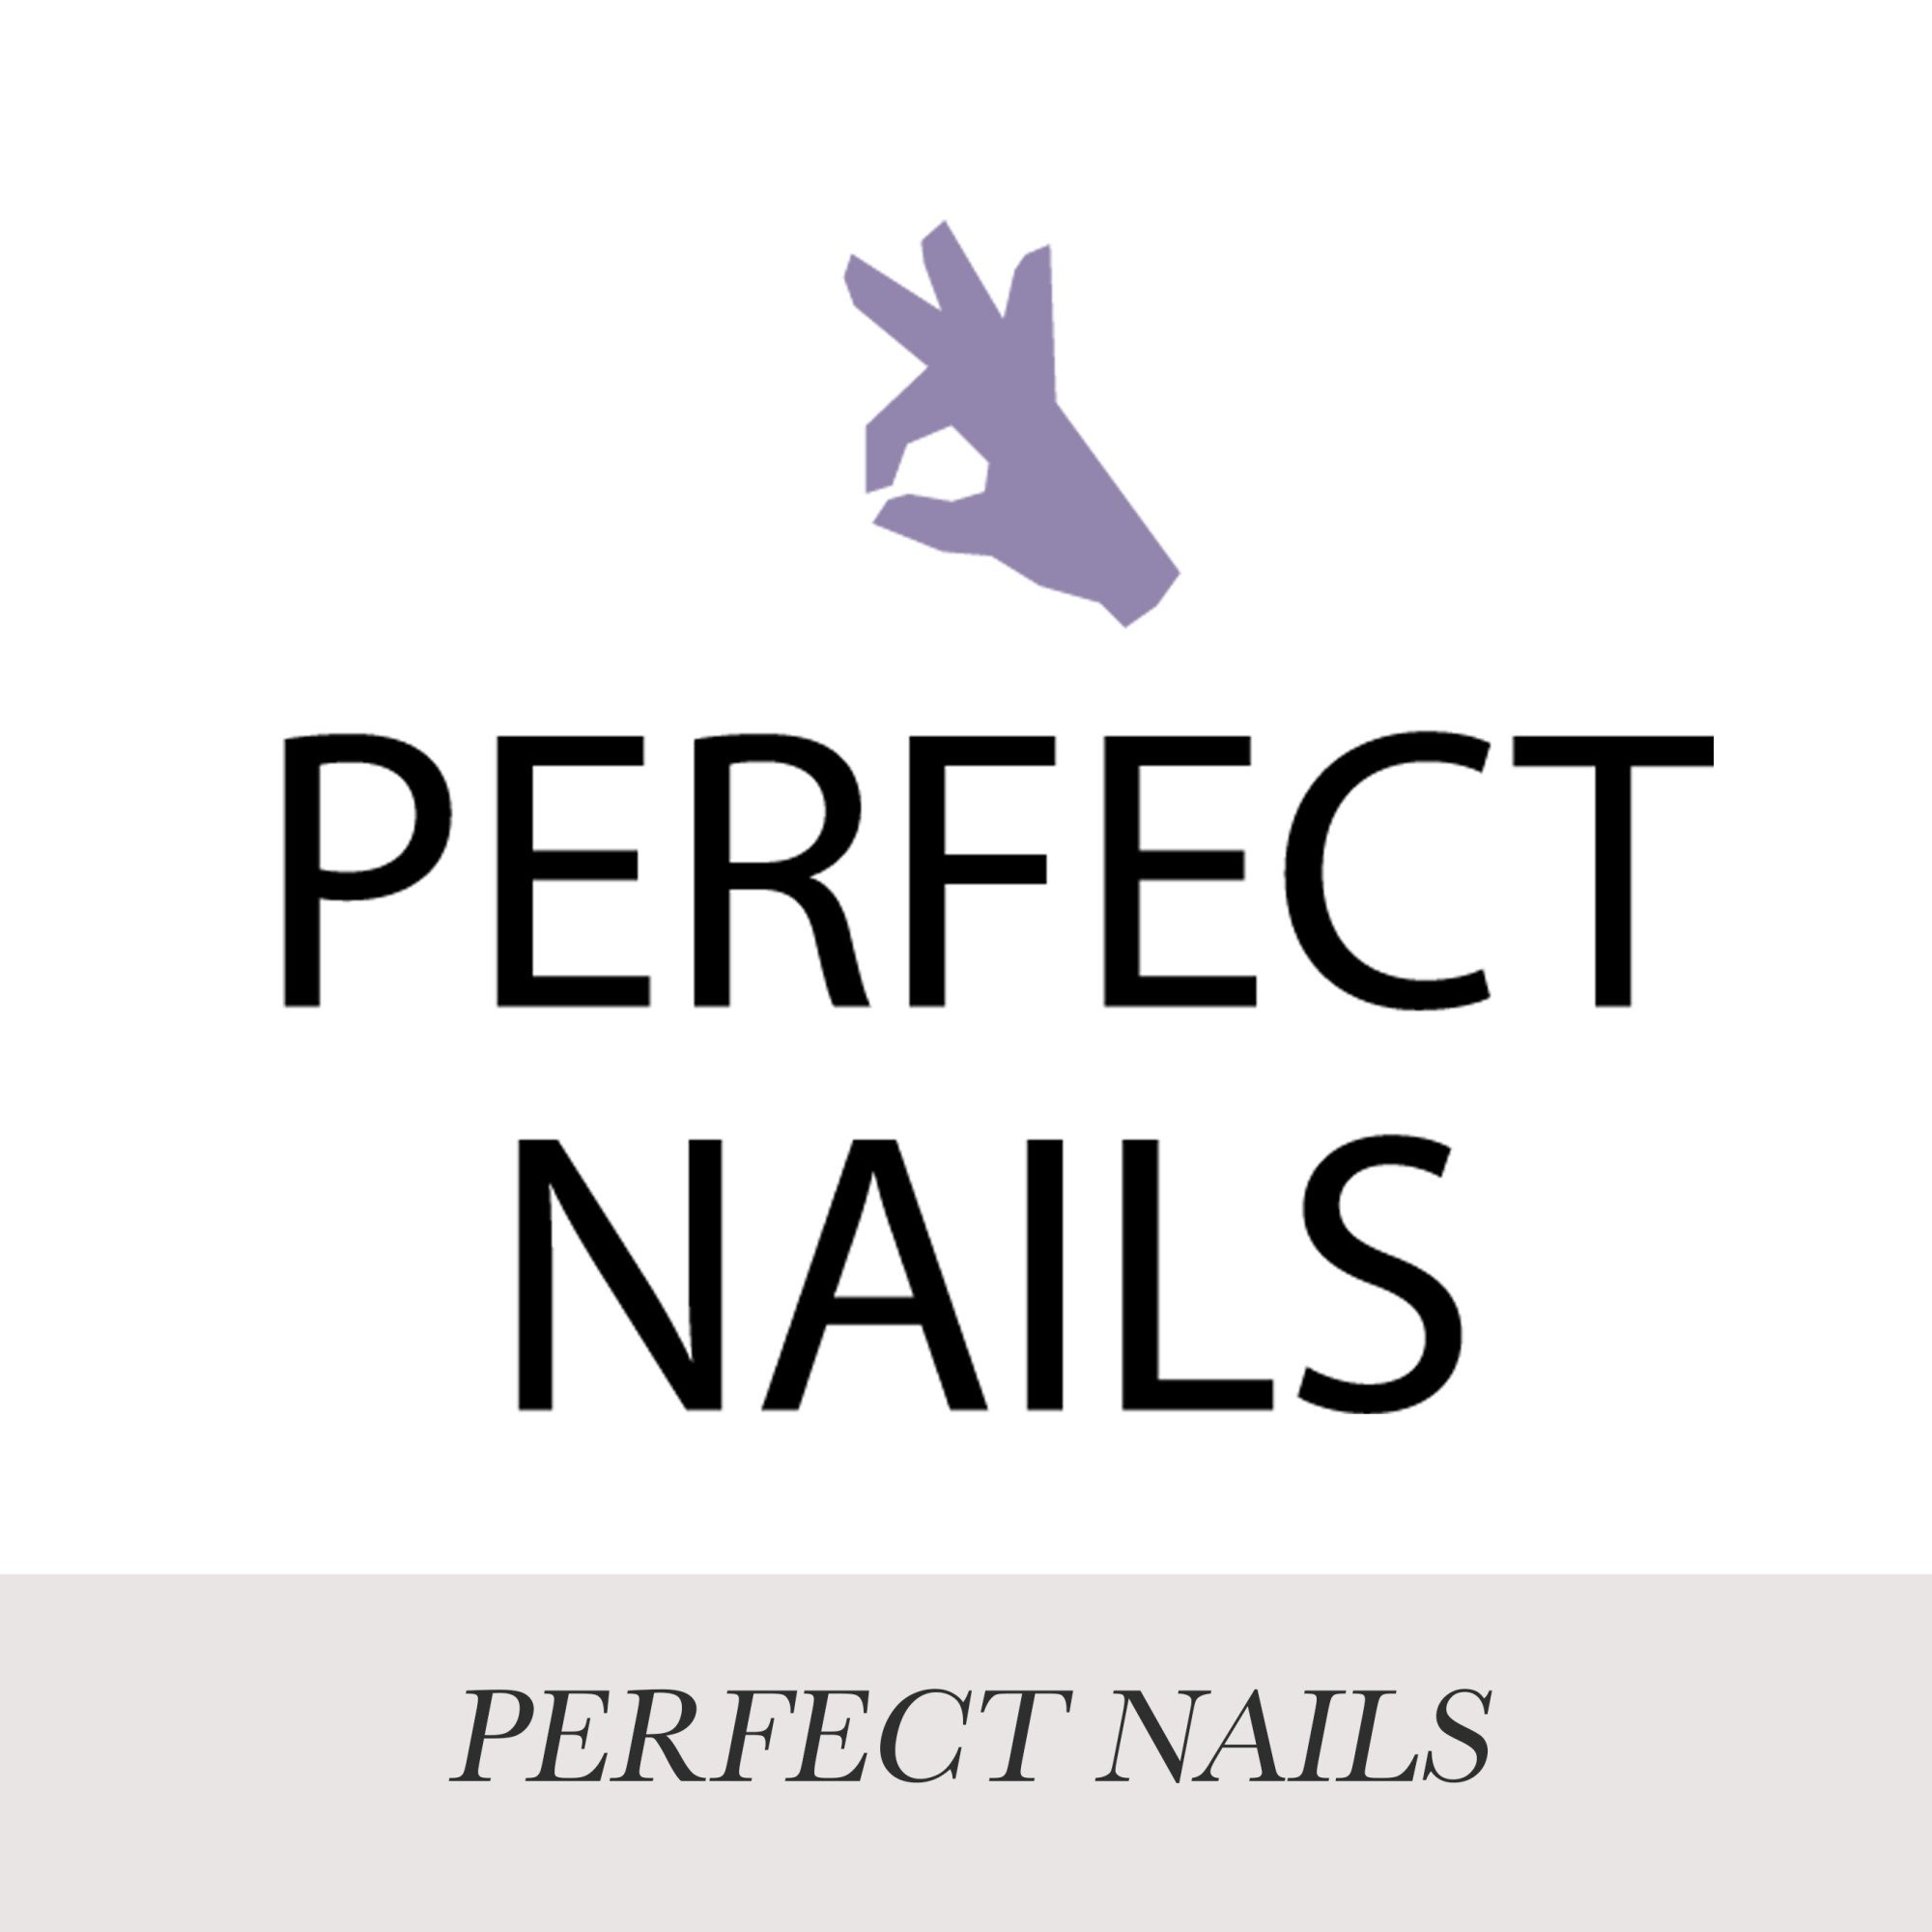 Perfect Nails Builder Gele - Briis AS